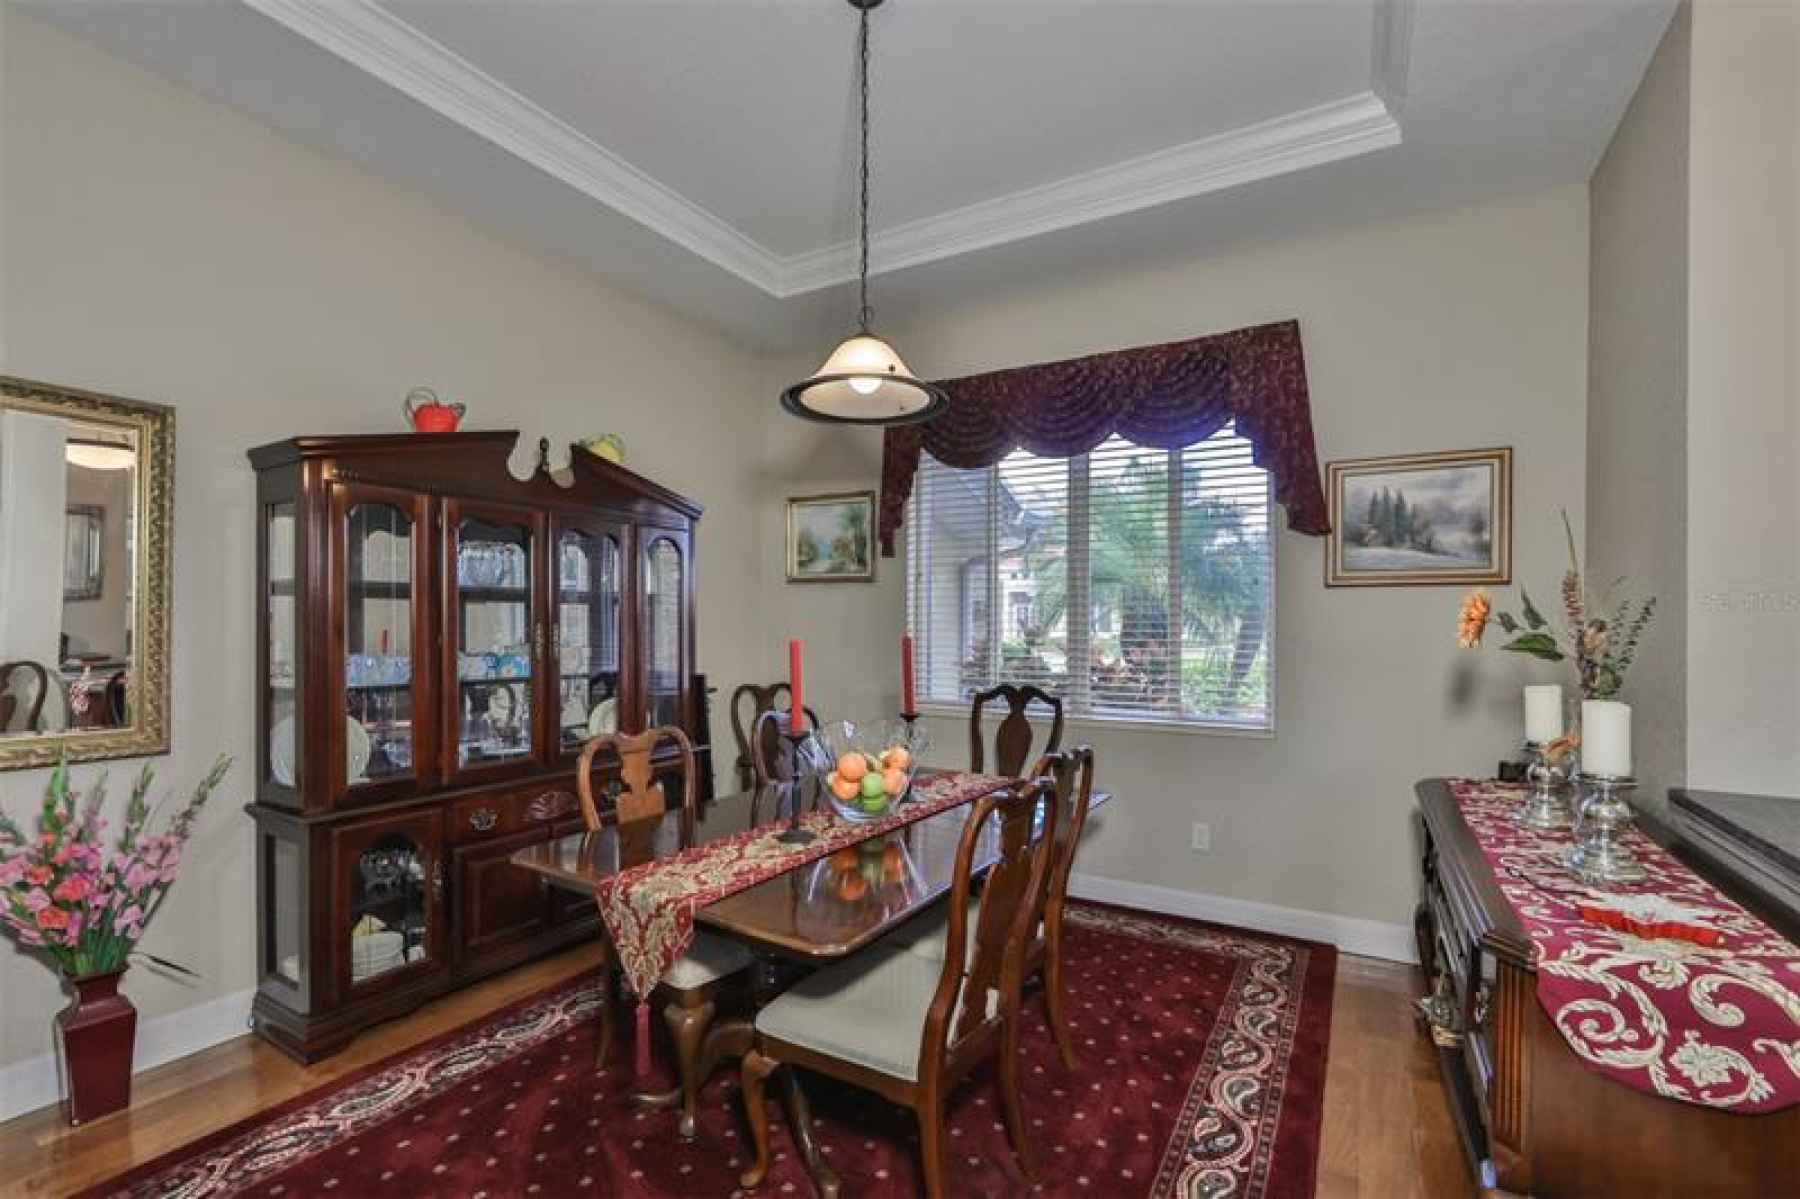 Formal dining room and real wood floor and tray ceiling.